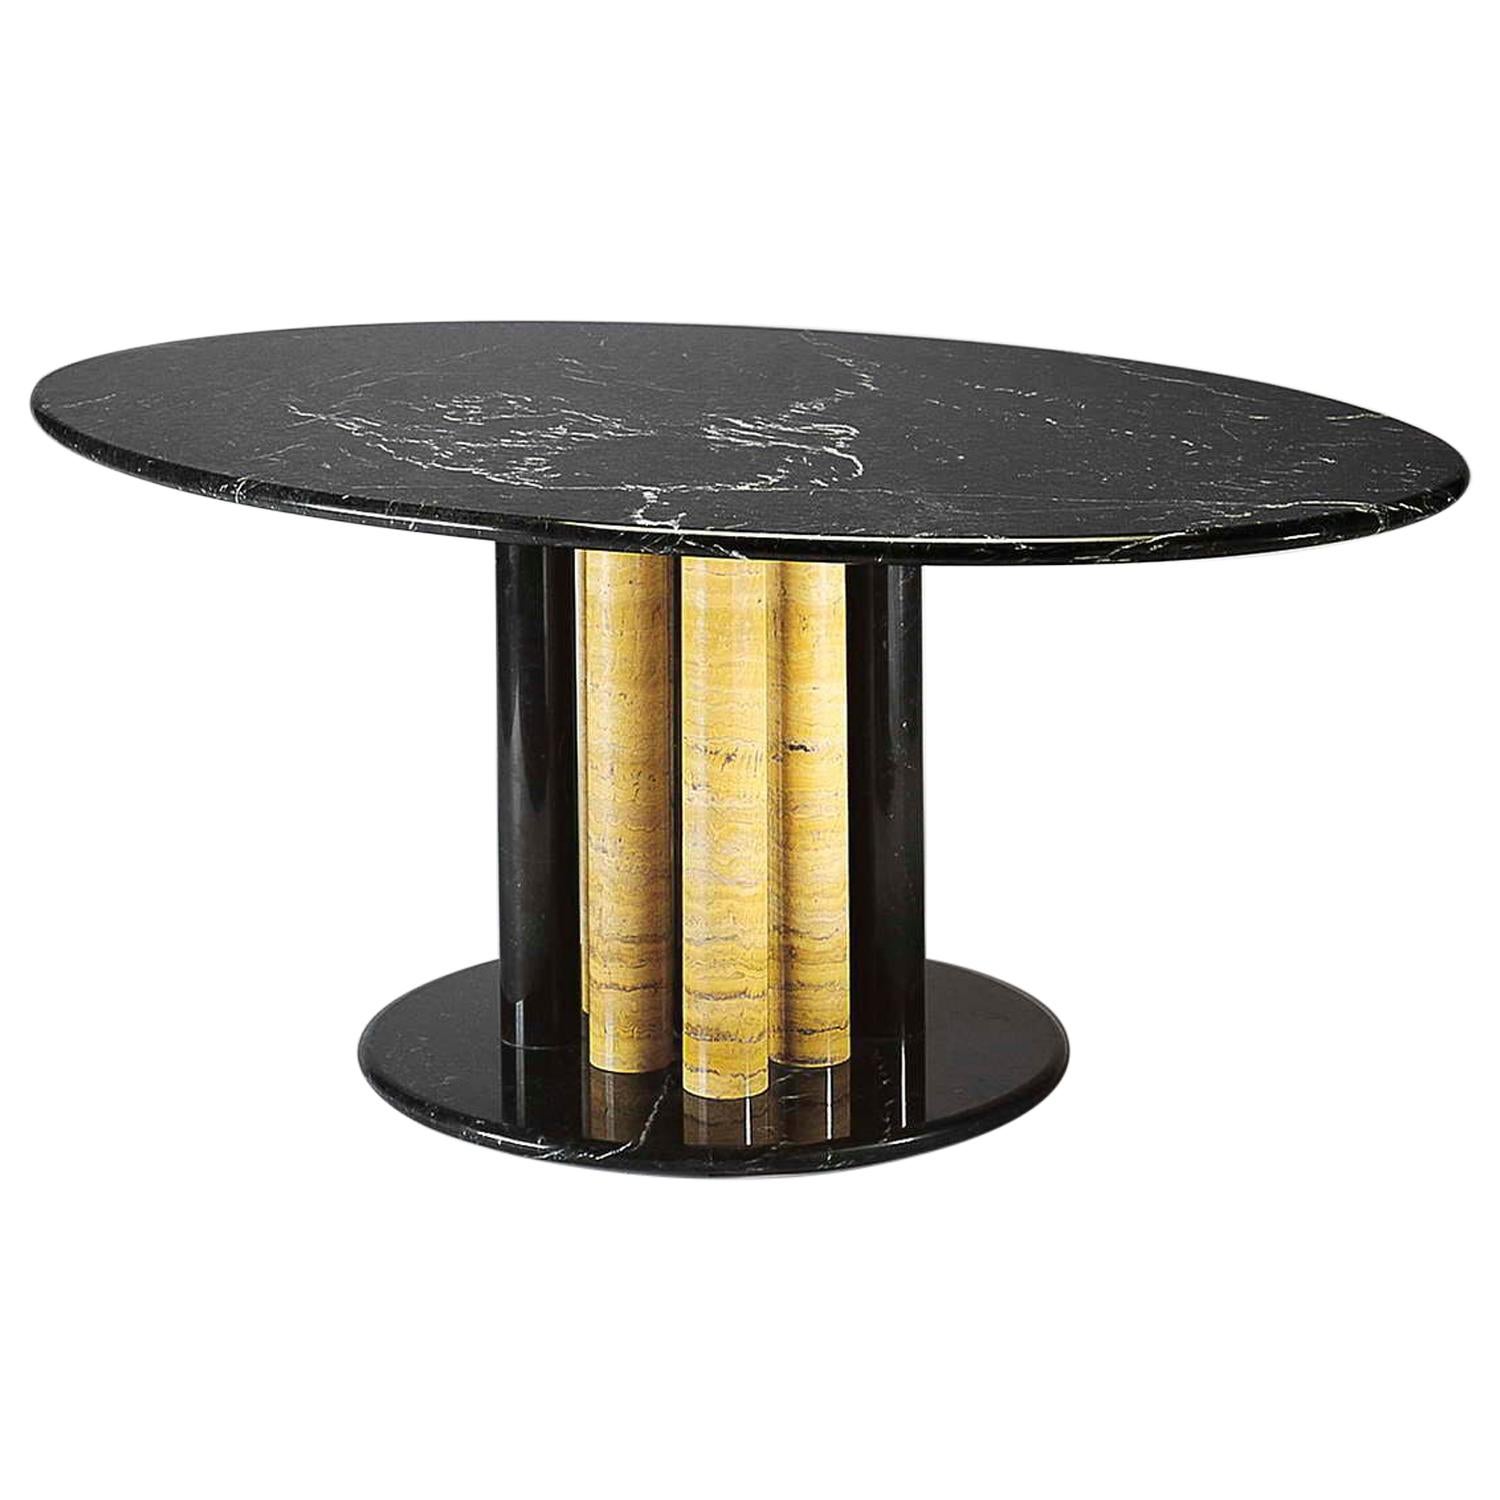 21st Century by Sergio Asti Marble Table in Yellow Travertine and Black Marquina